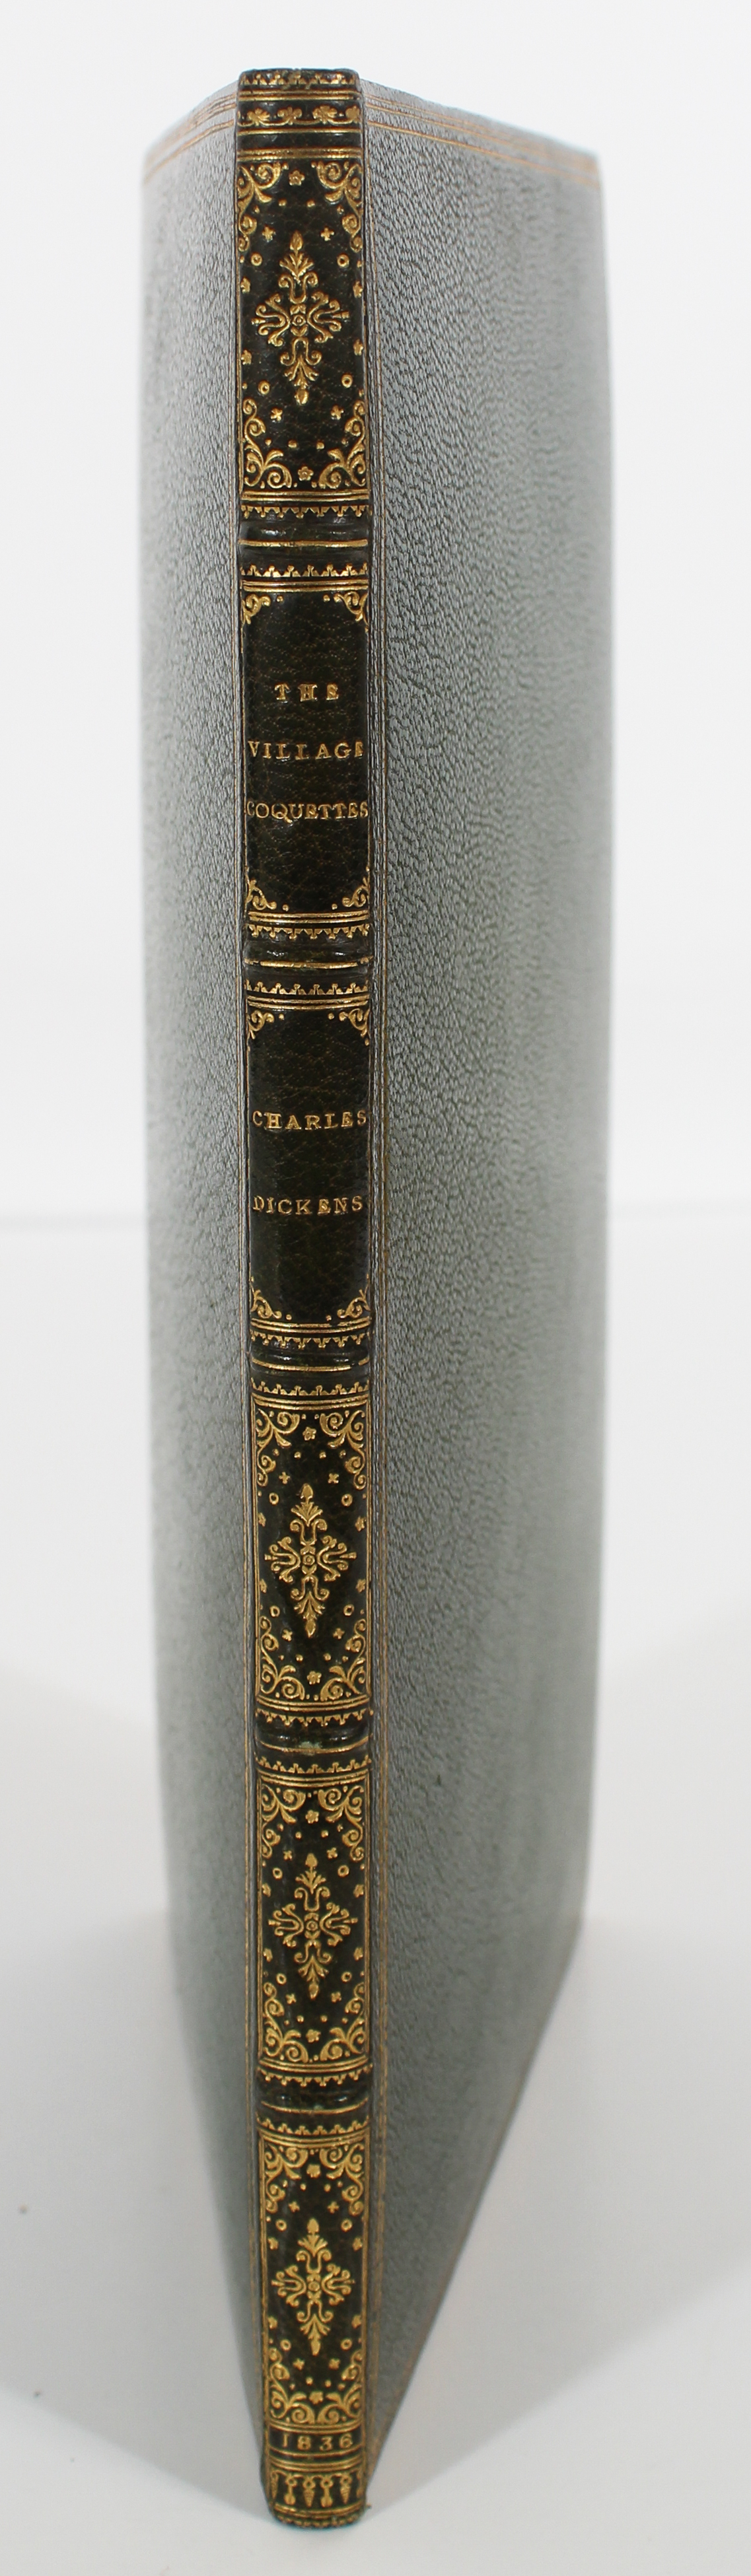 Charles Dickens, The Village Coquettes,1st Ed 1836 - Image 2 of 5